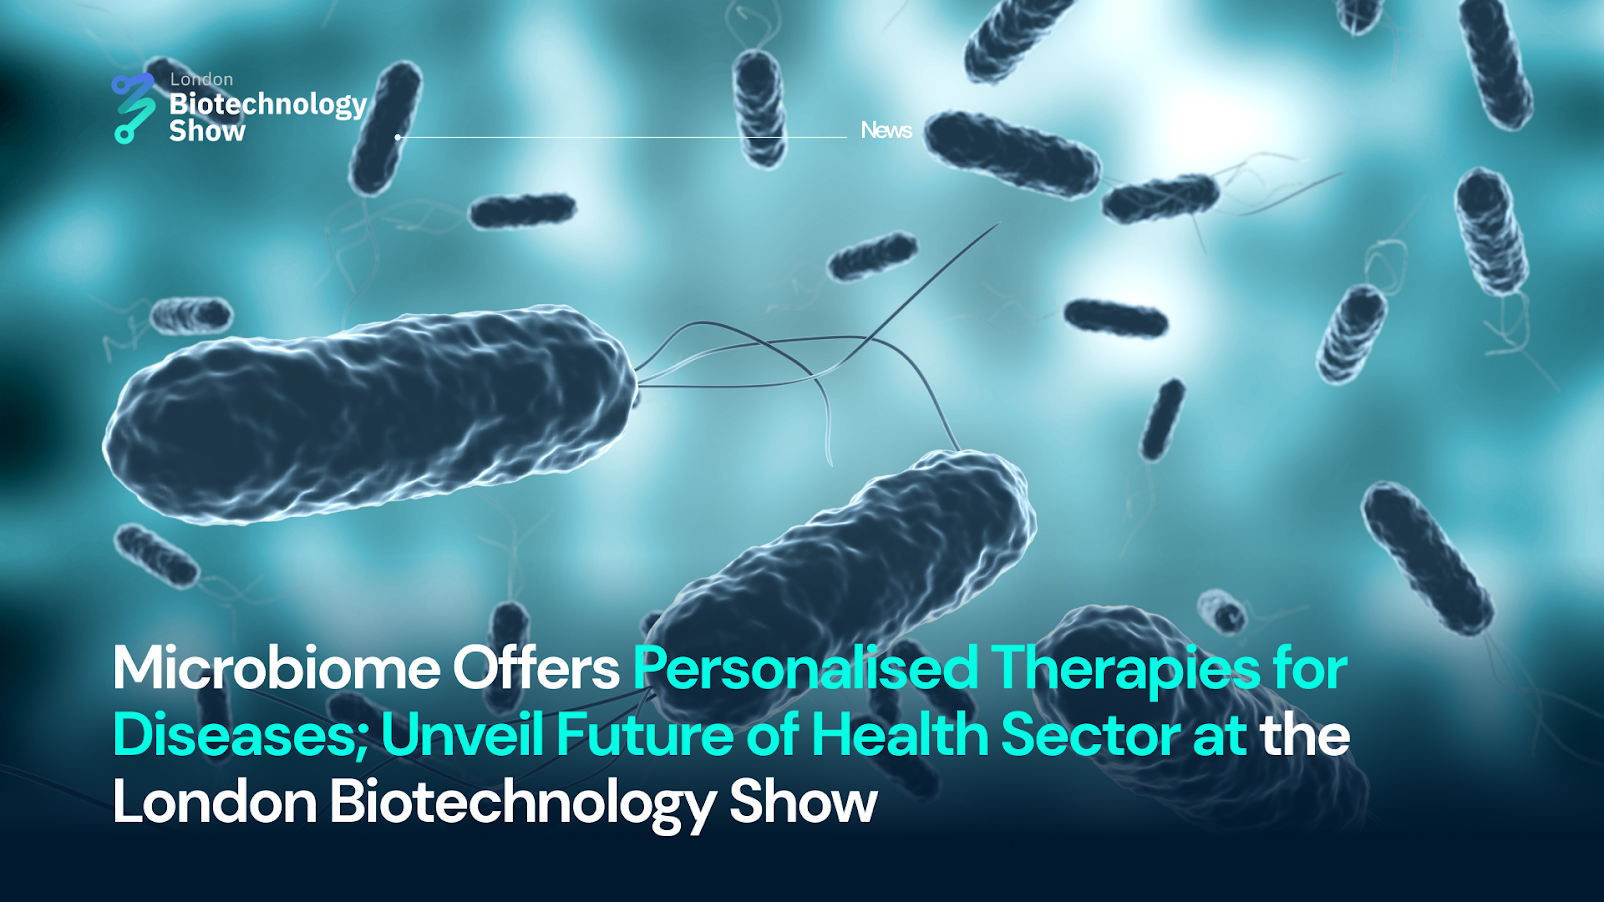 Microbiome Offers Personalised Therapies for Diseases; Unveil Future of Health Sector at the London Biotechnology Show